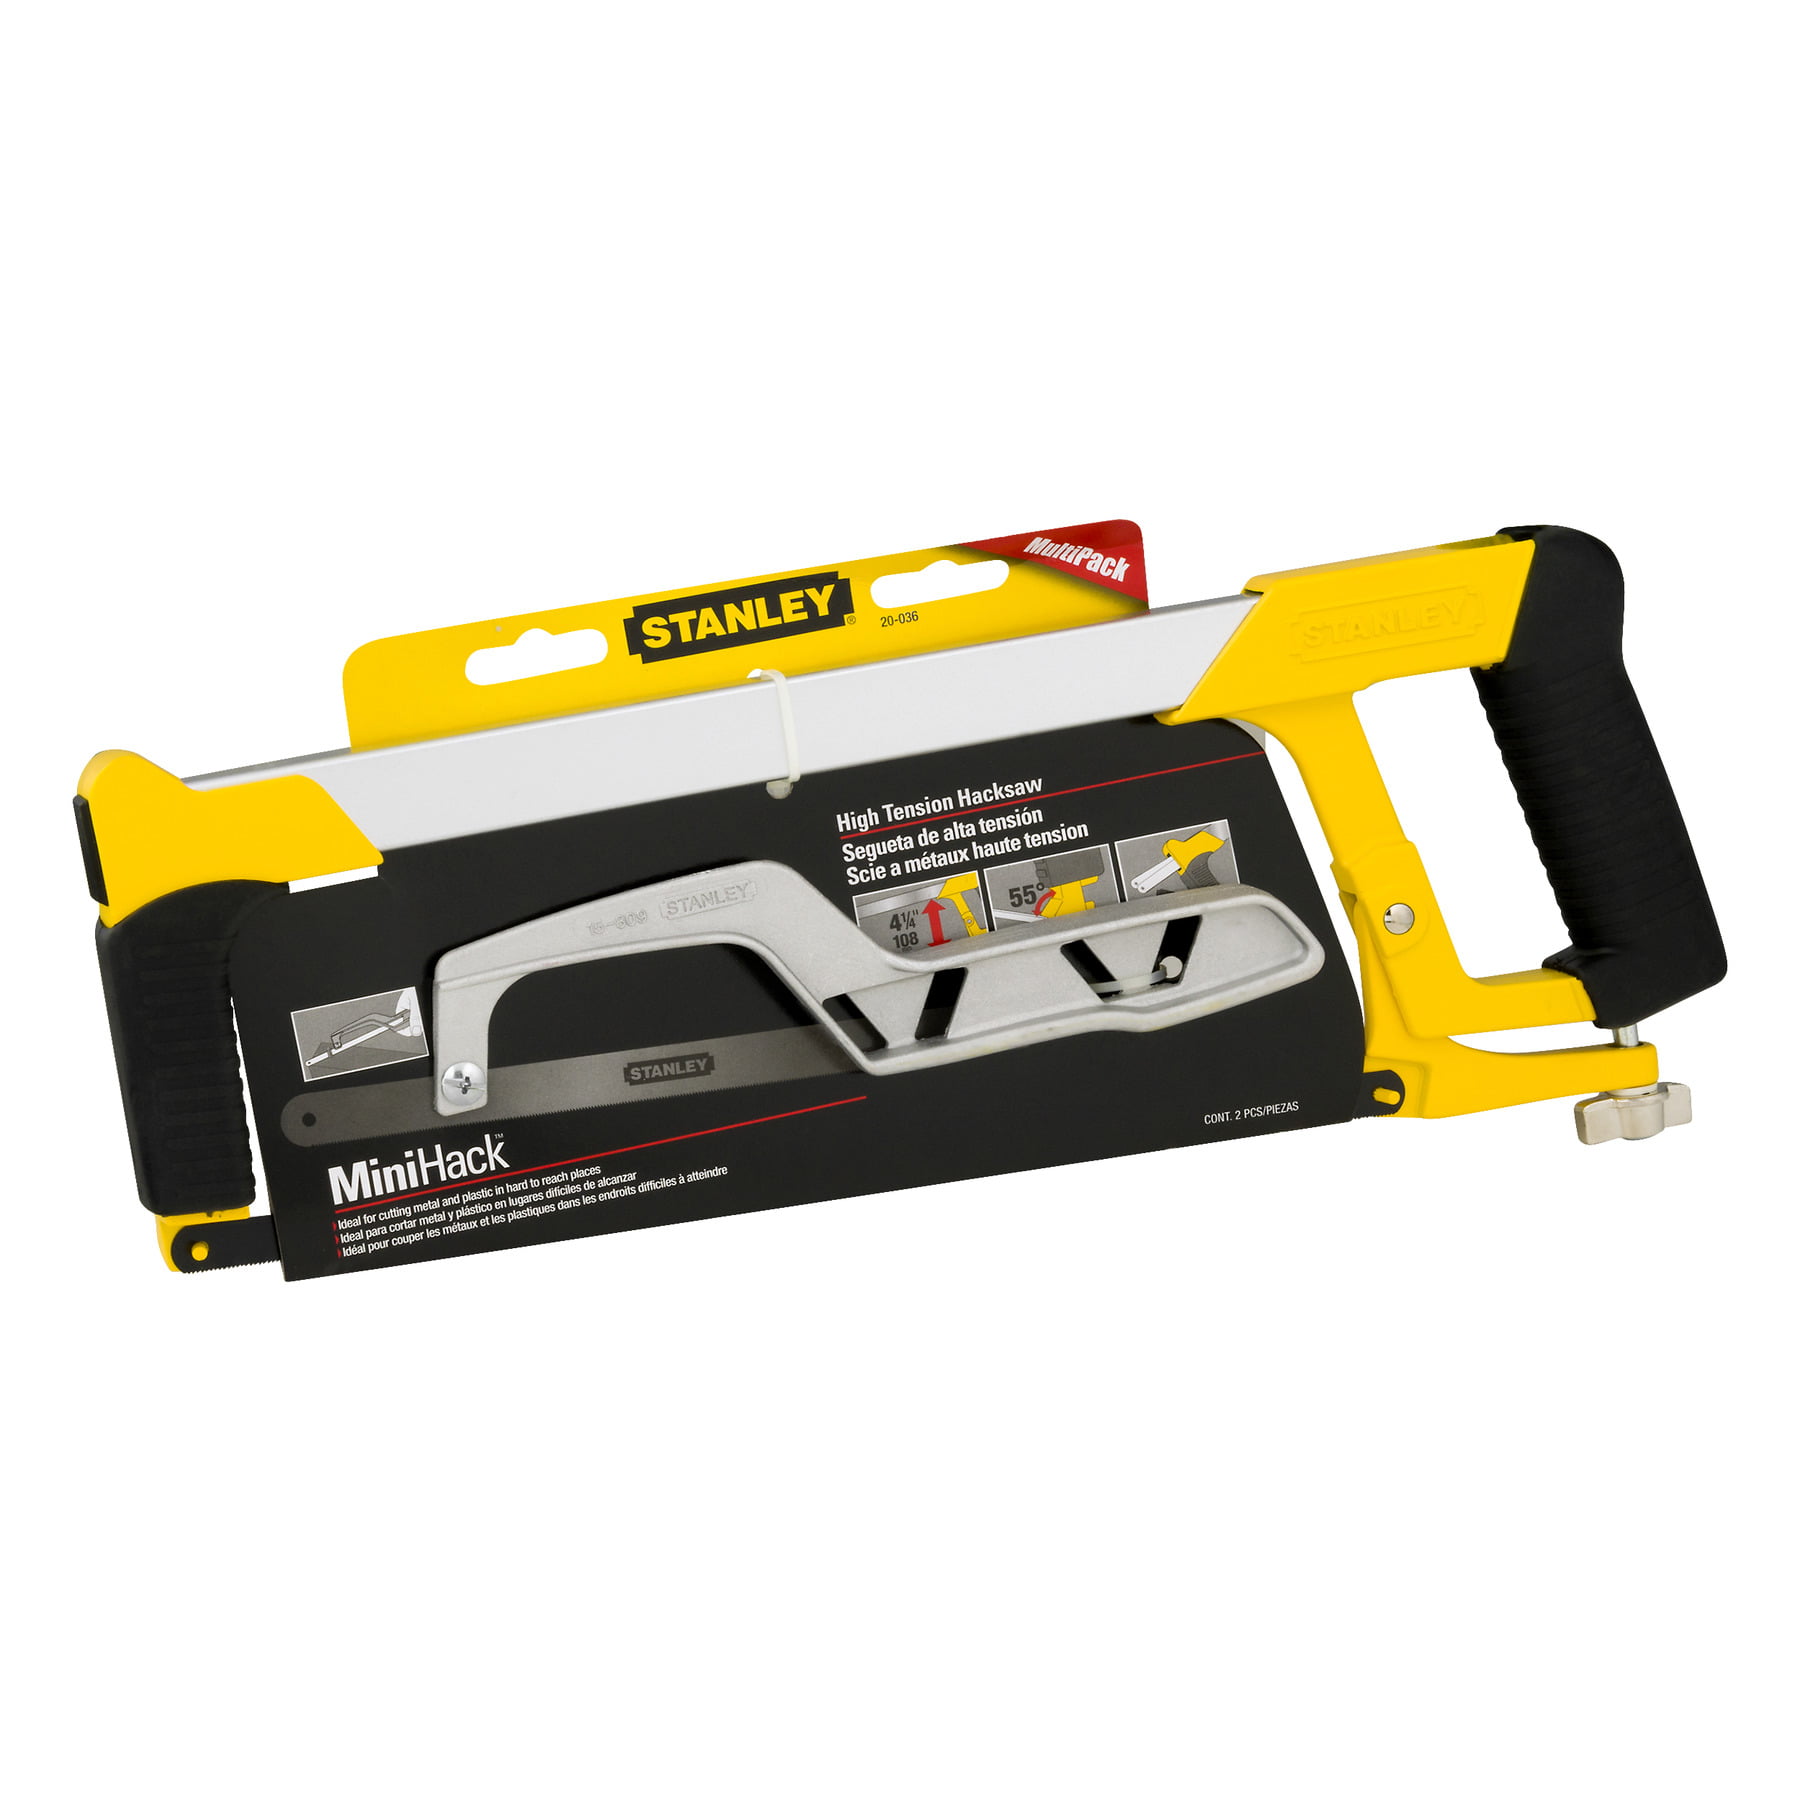 Stanley 12 inch High-Tension Hacksaw with Mini Hack Saw